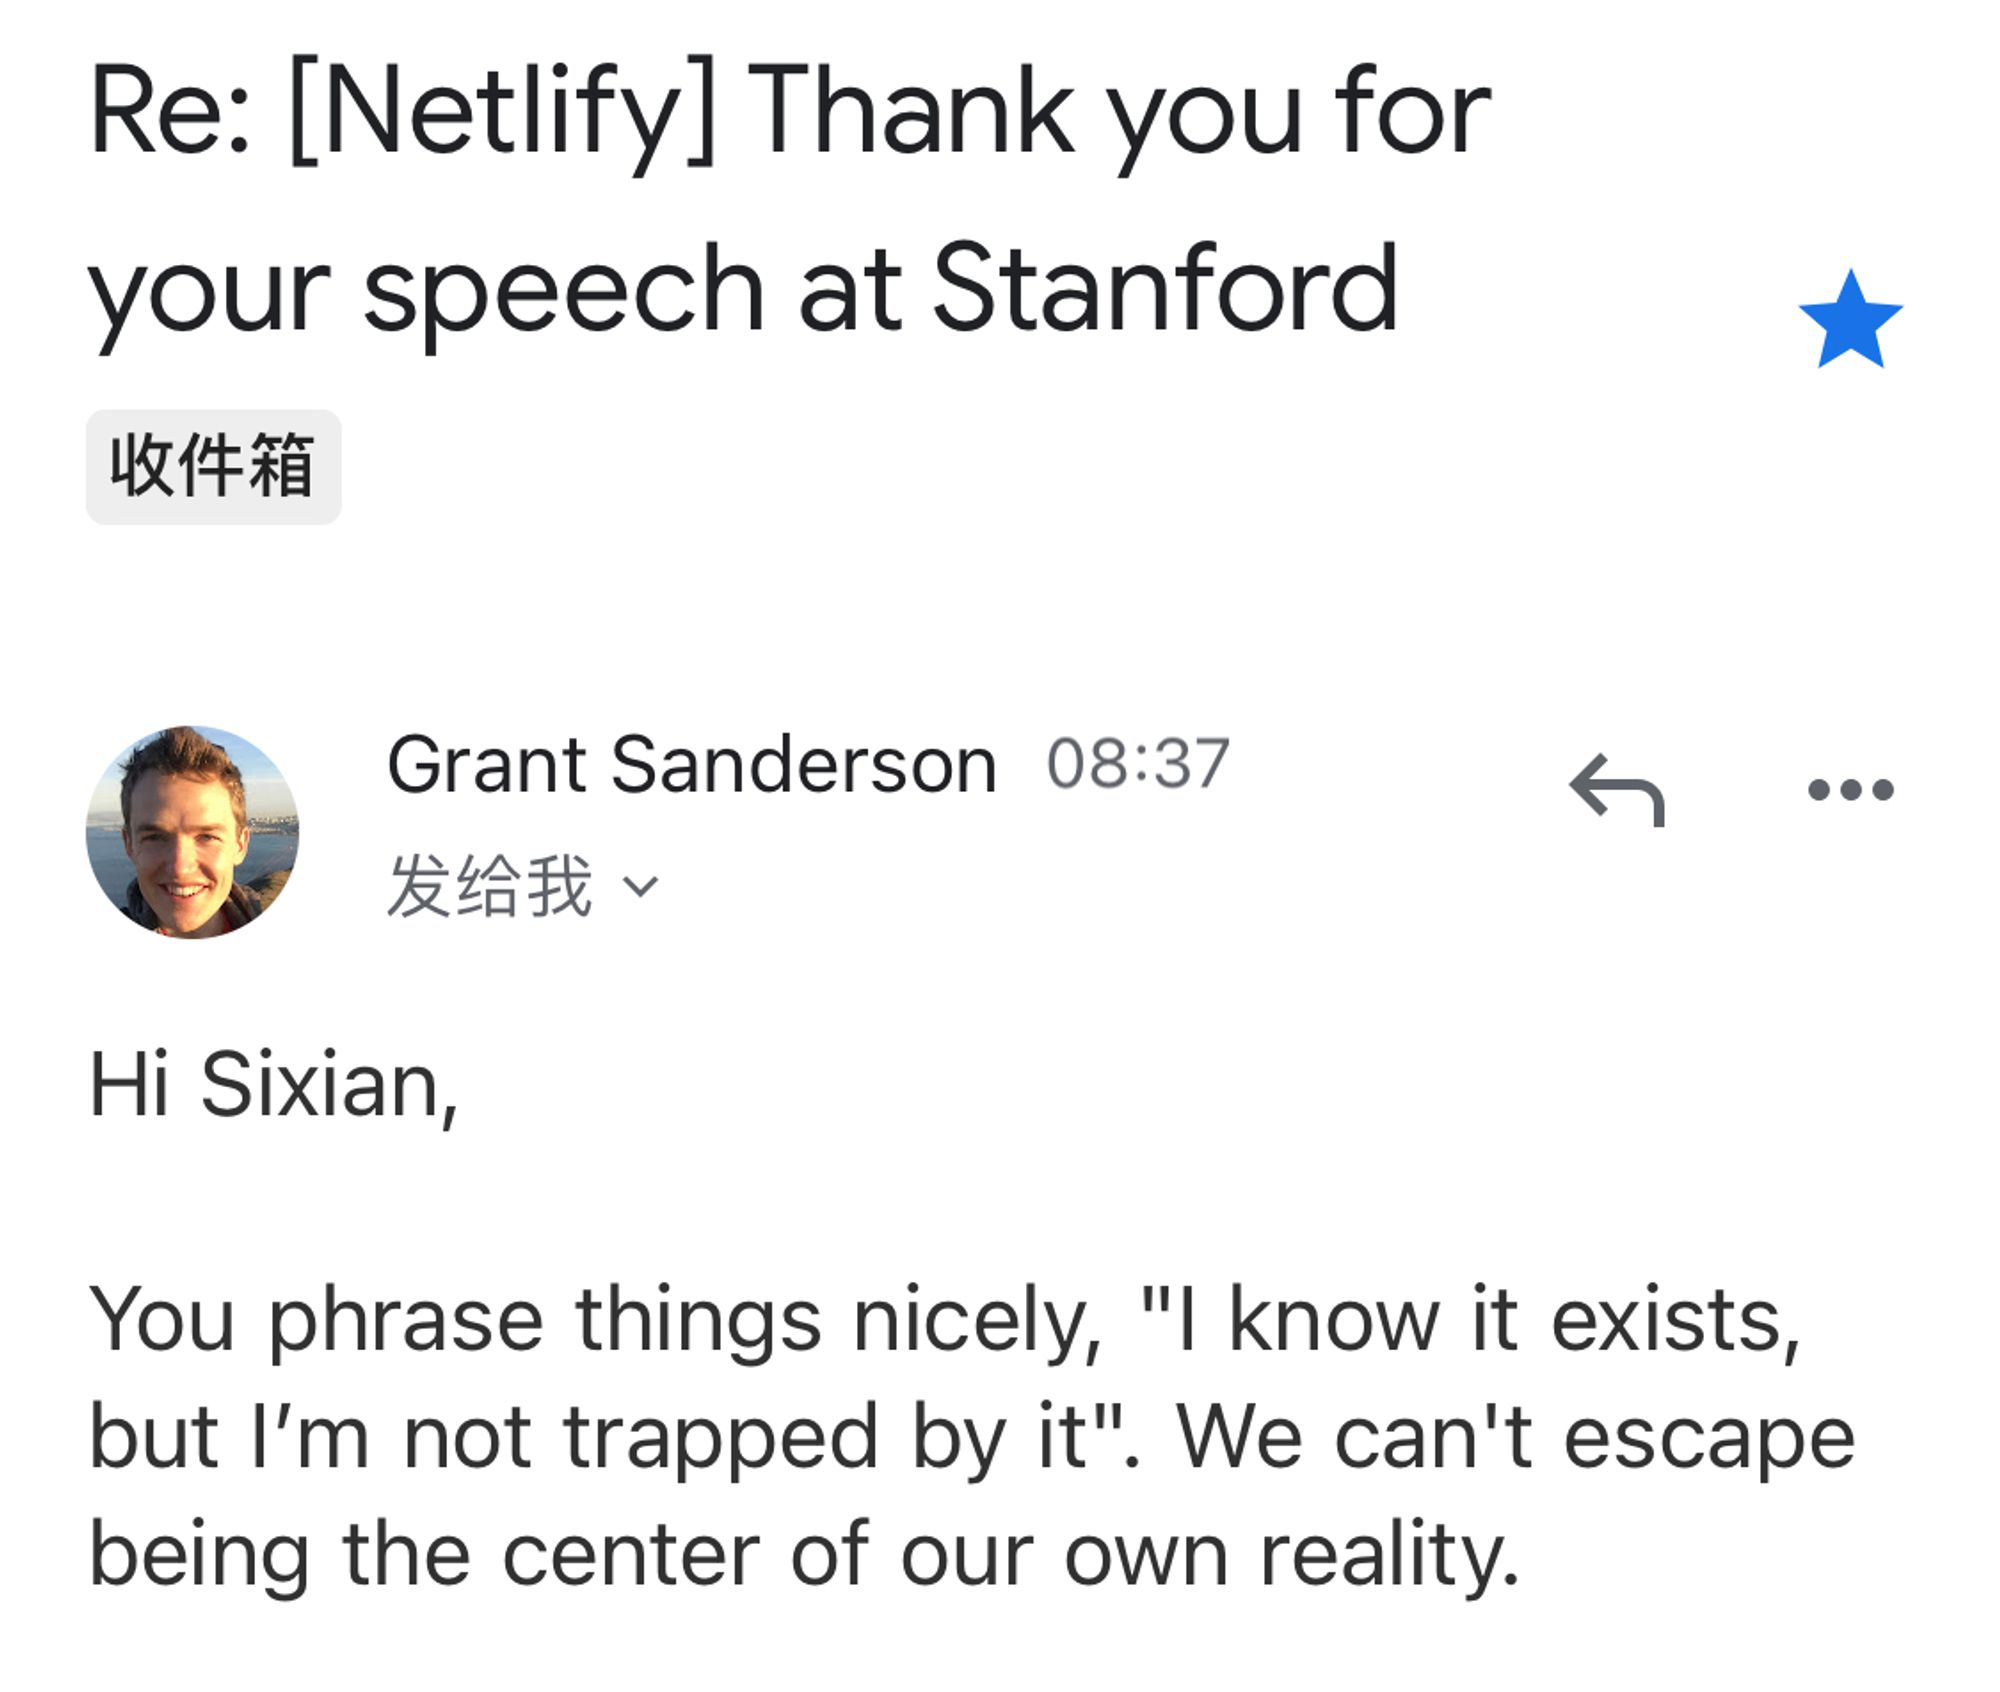 reply from Grant